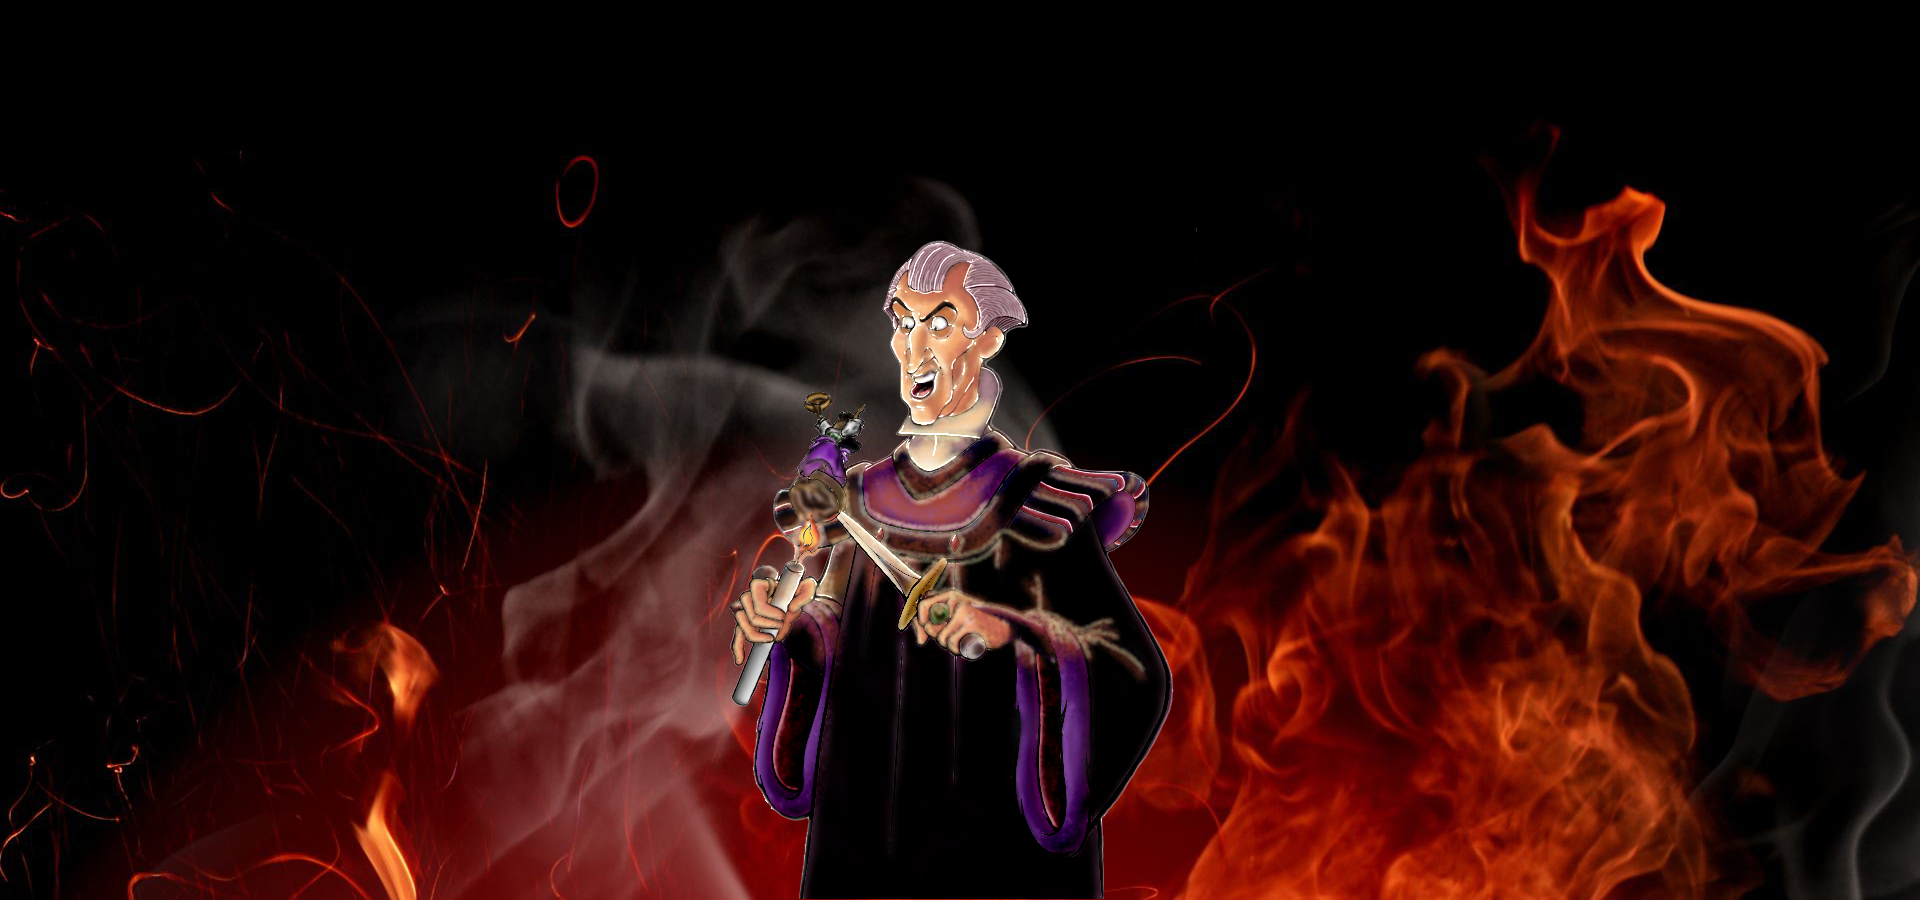 Disney Judge Claude Frollo Hunchback of Notre Dame Coloring Page